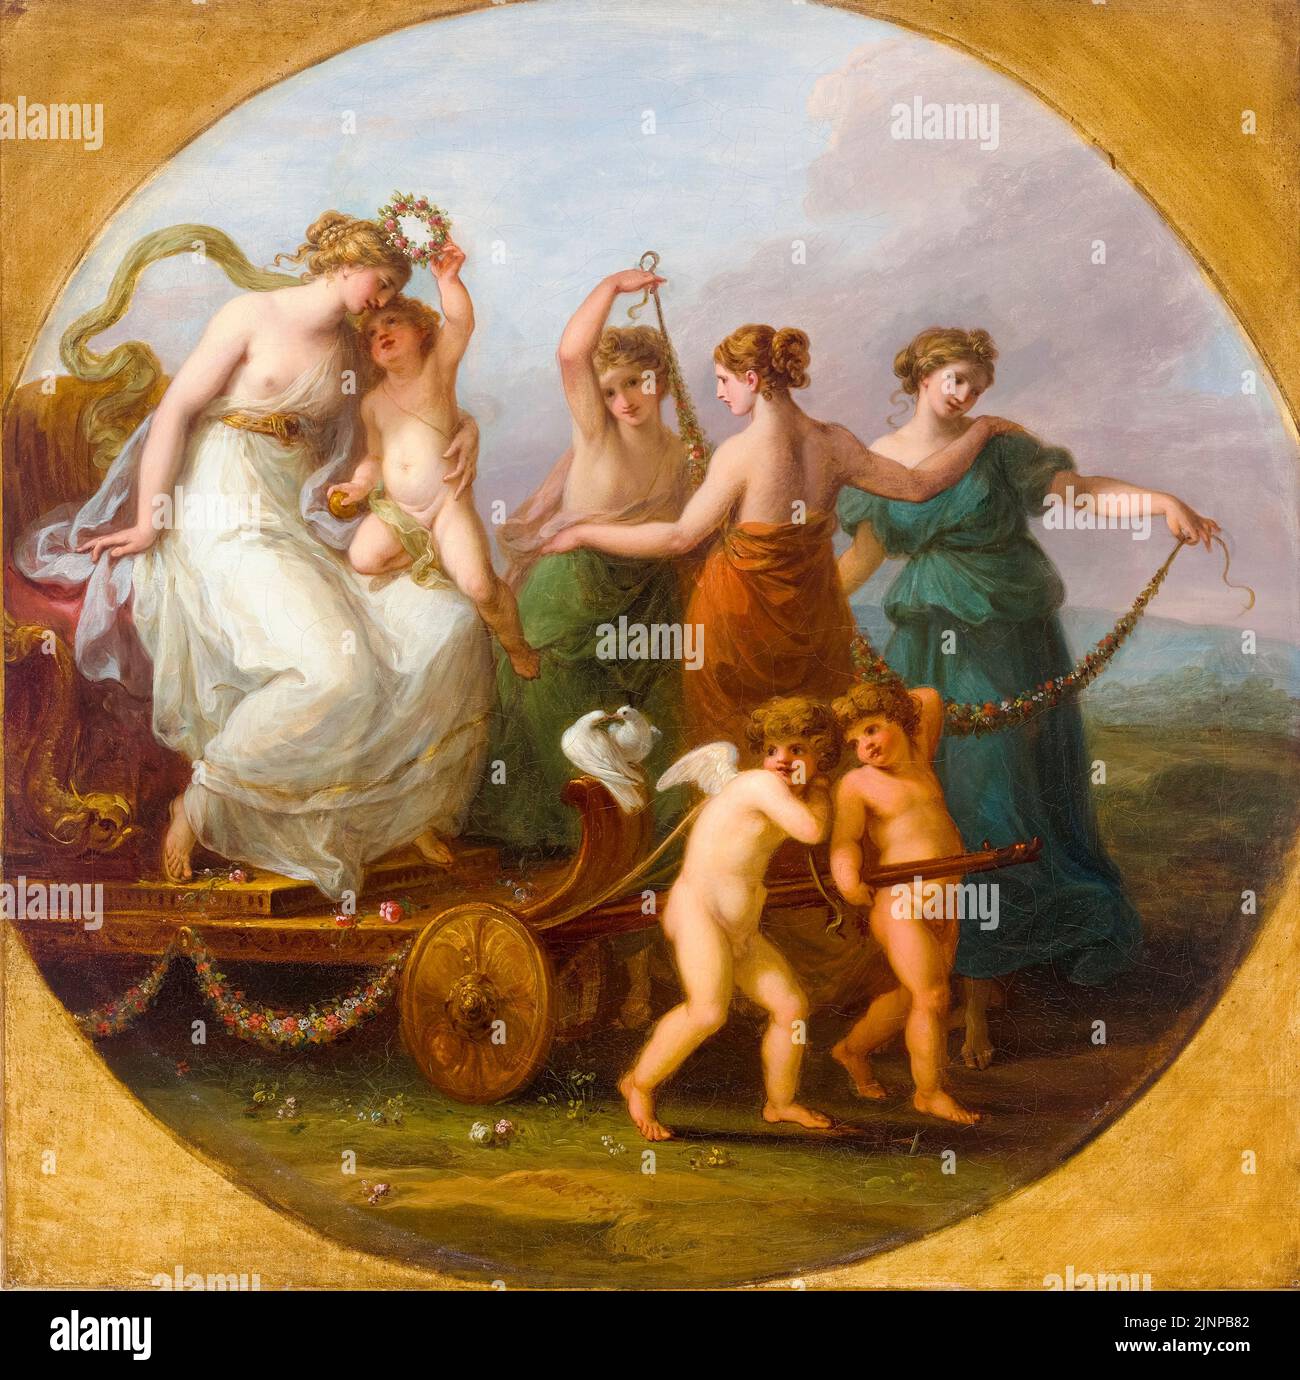 The Triumph of Venus with the Three Graces, painting in oil on canvas by Angelica Kauffman, before 1807 Stock Photo